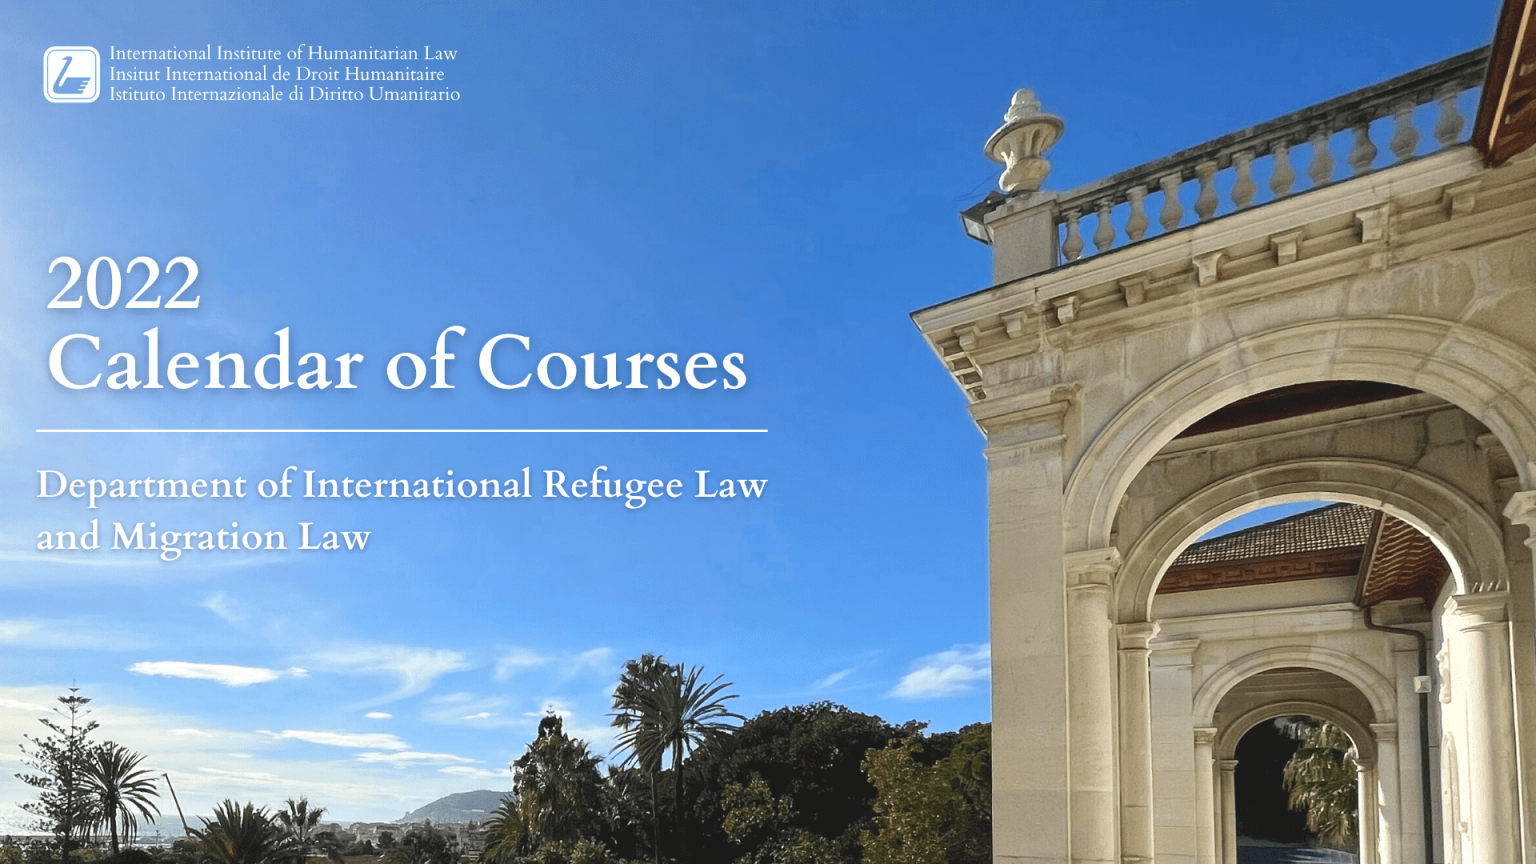 Department of International Refugee Law and Migration Law – 2022 Calendar of Courses